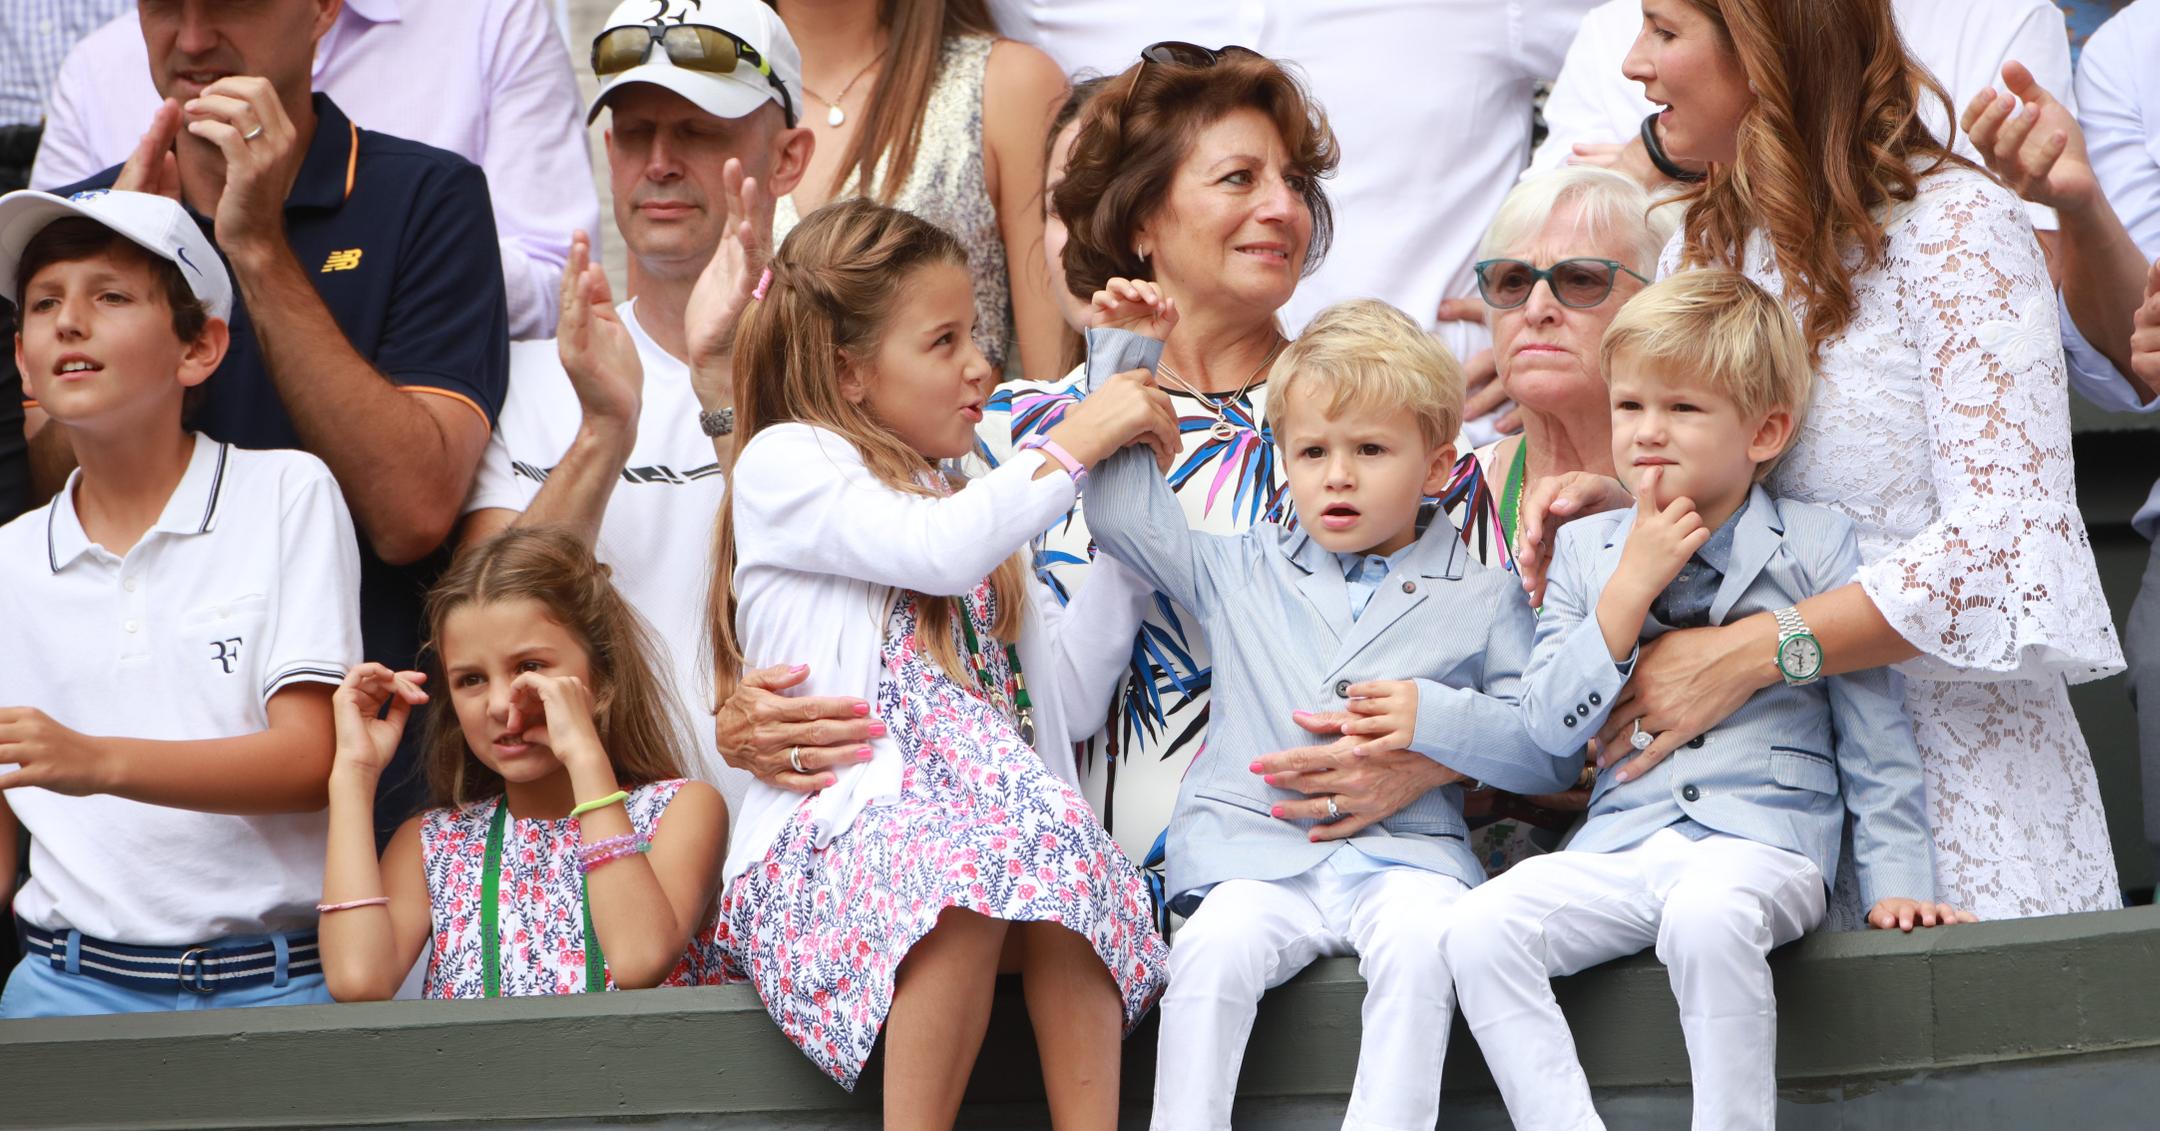 Roger Federer's Kids Make the Tennis Star One Busy Dad of Four